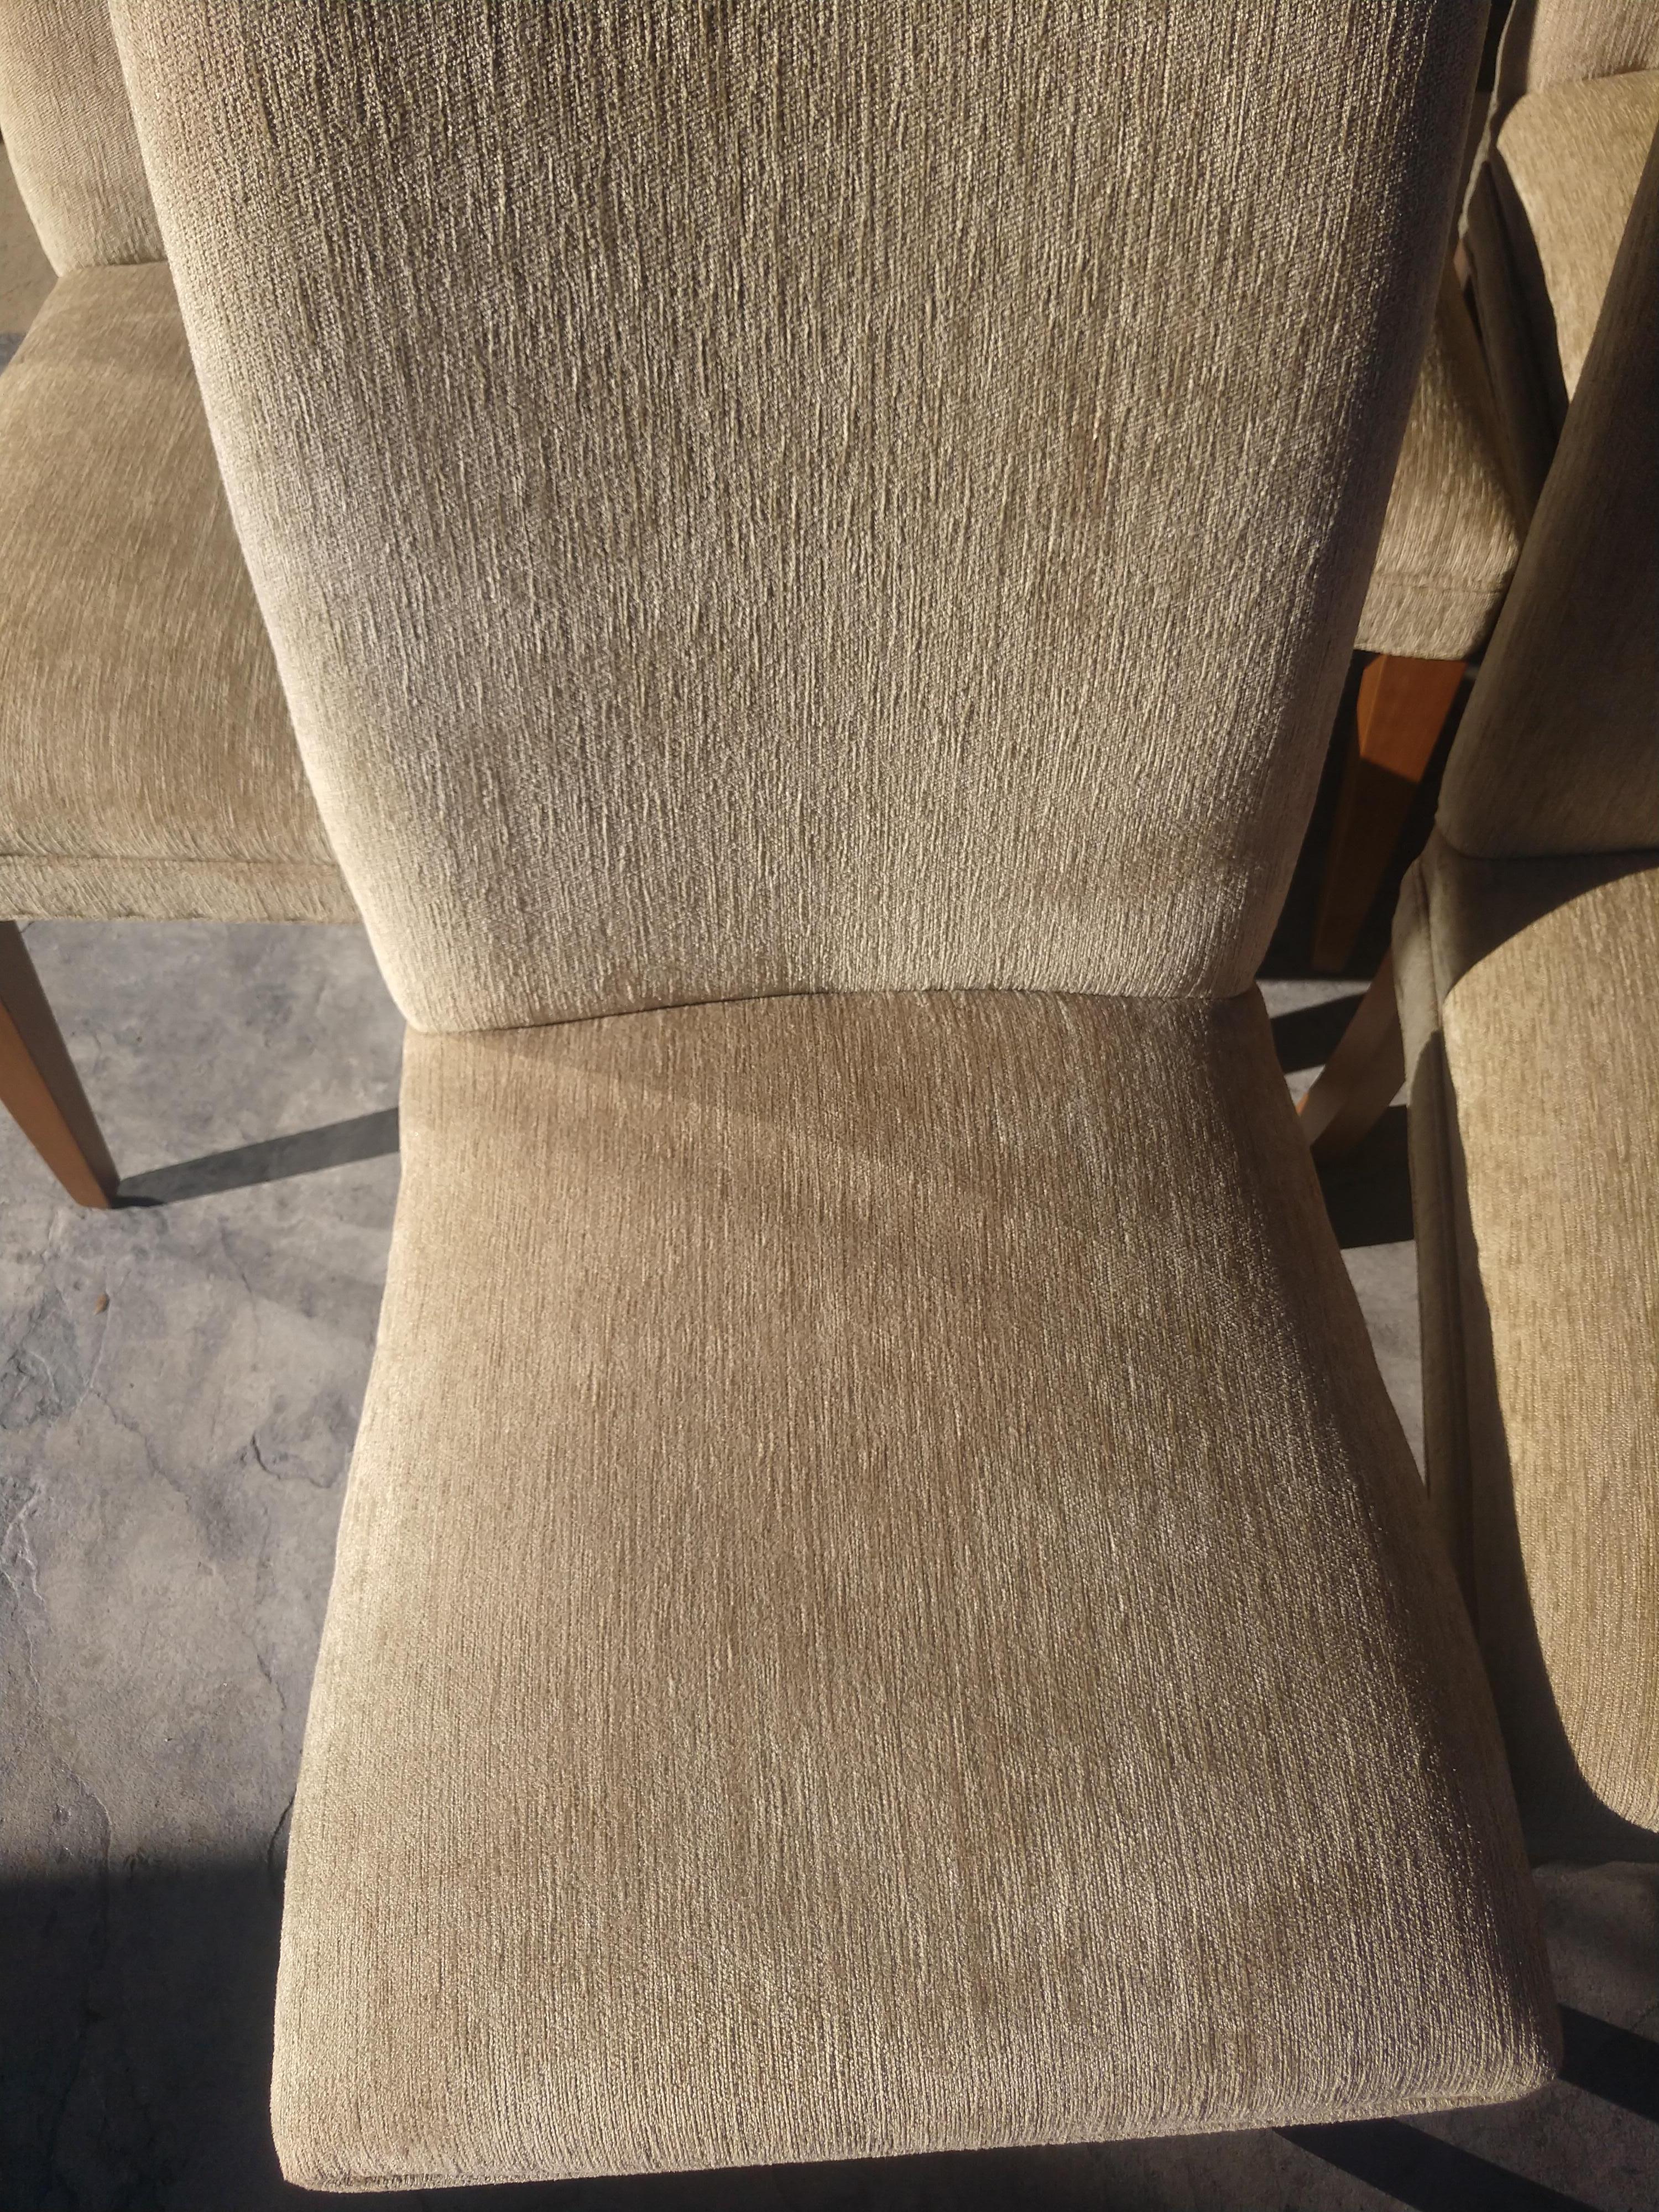 Set of 8 Upolstered dining chairs by Mitchell Gold for Restoration Hardware. Seat & back covered in a gold beige satin blend. Hardwood legs. Chairs are in excellent vintage condition with minimal wear. One tiny stain on a seat. Haven't tried to